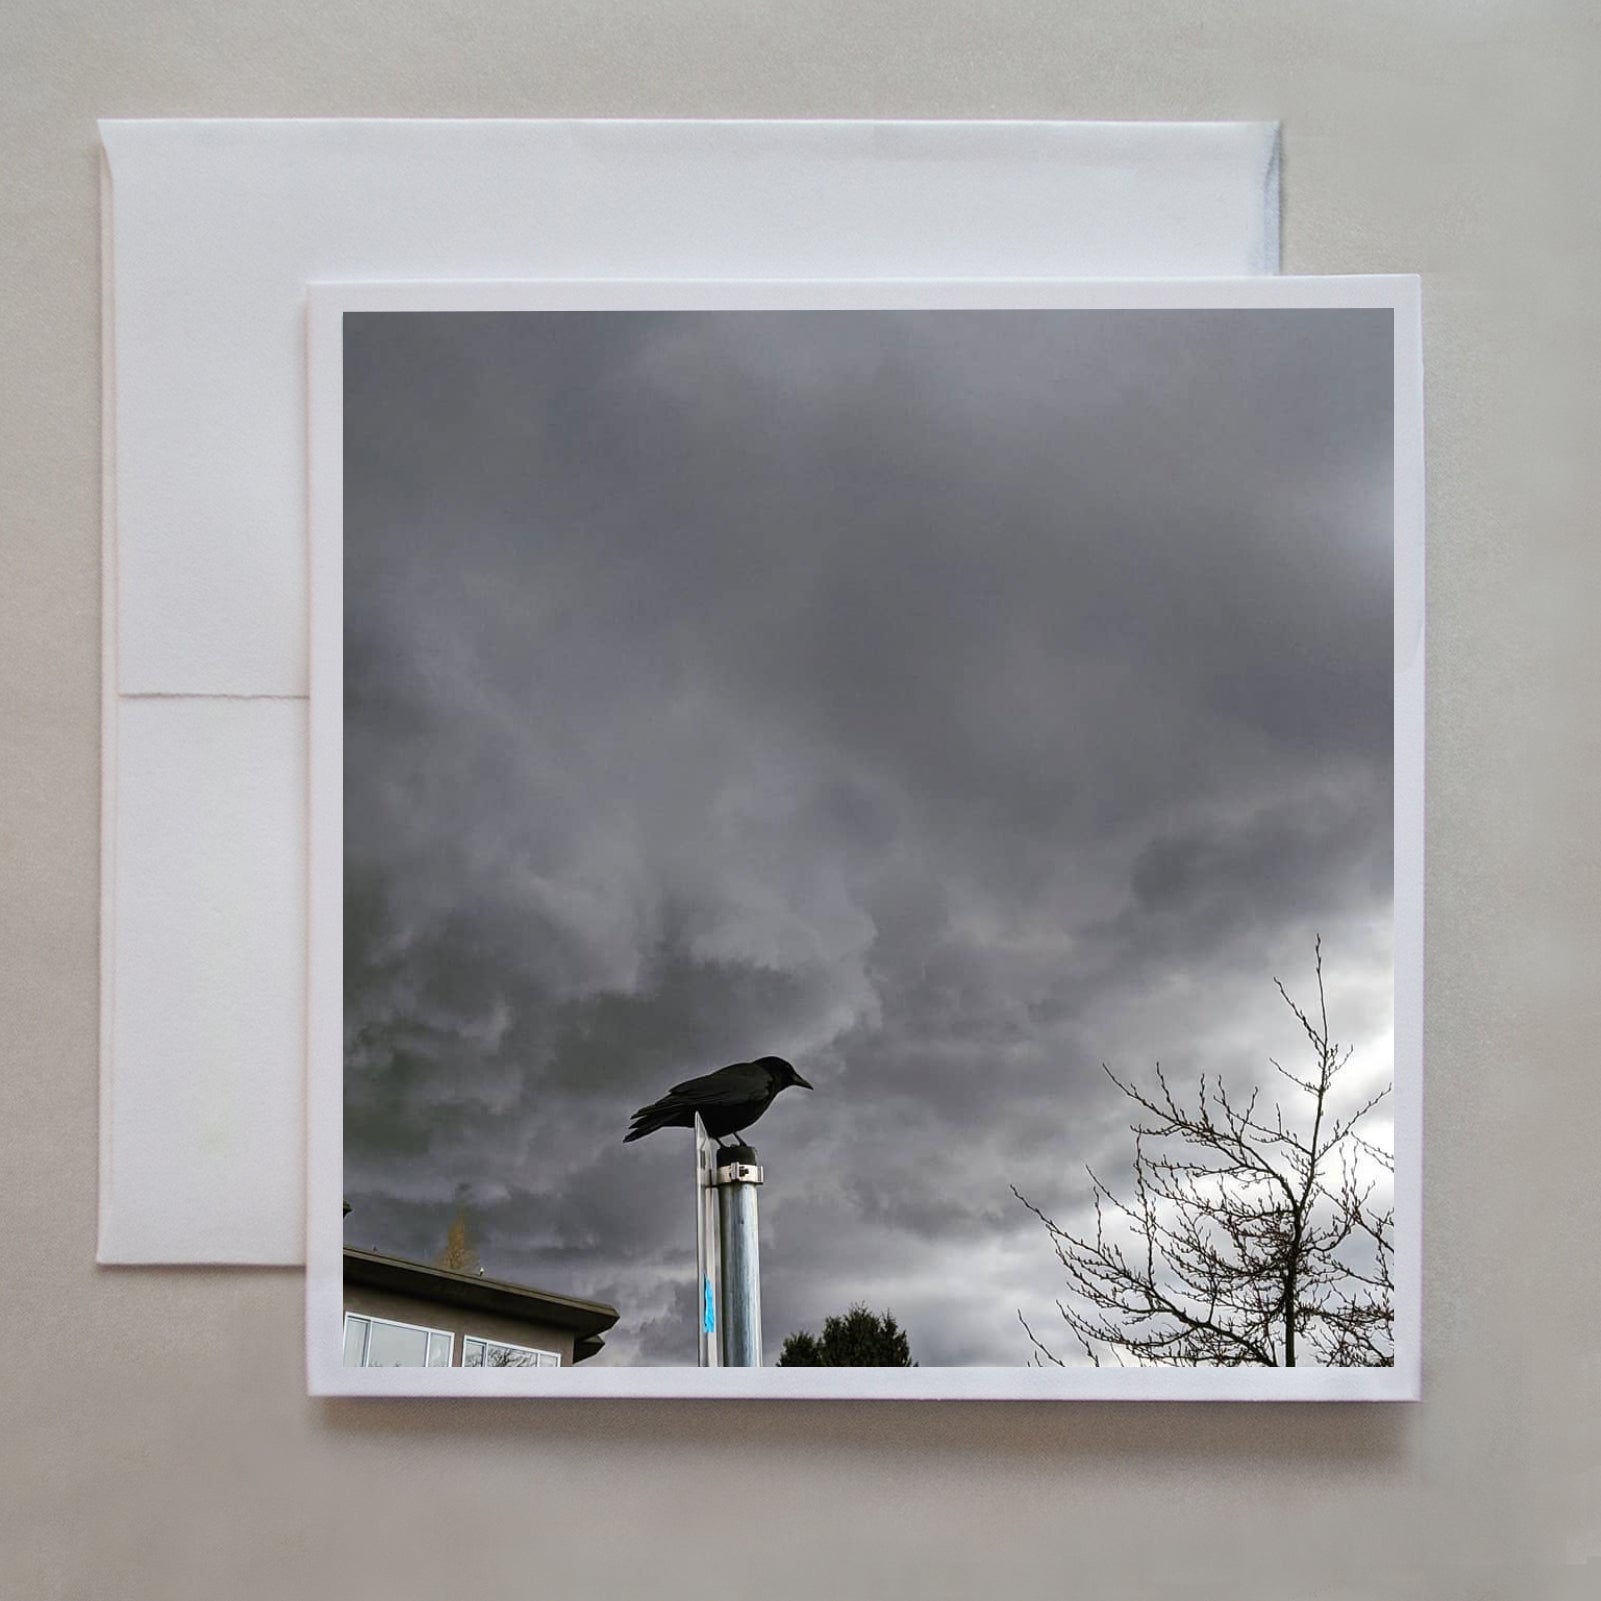 A crow sits on top of a traffic sign while  stormy clouds loom over head in this photograph by Jennifer Echols.